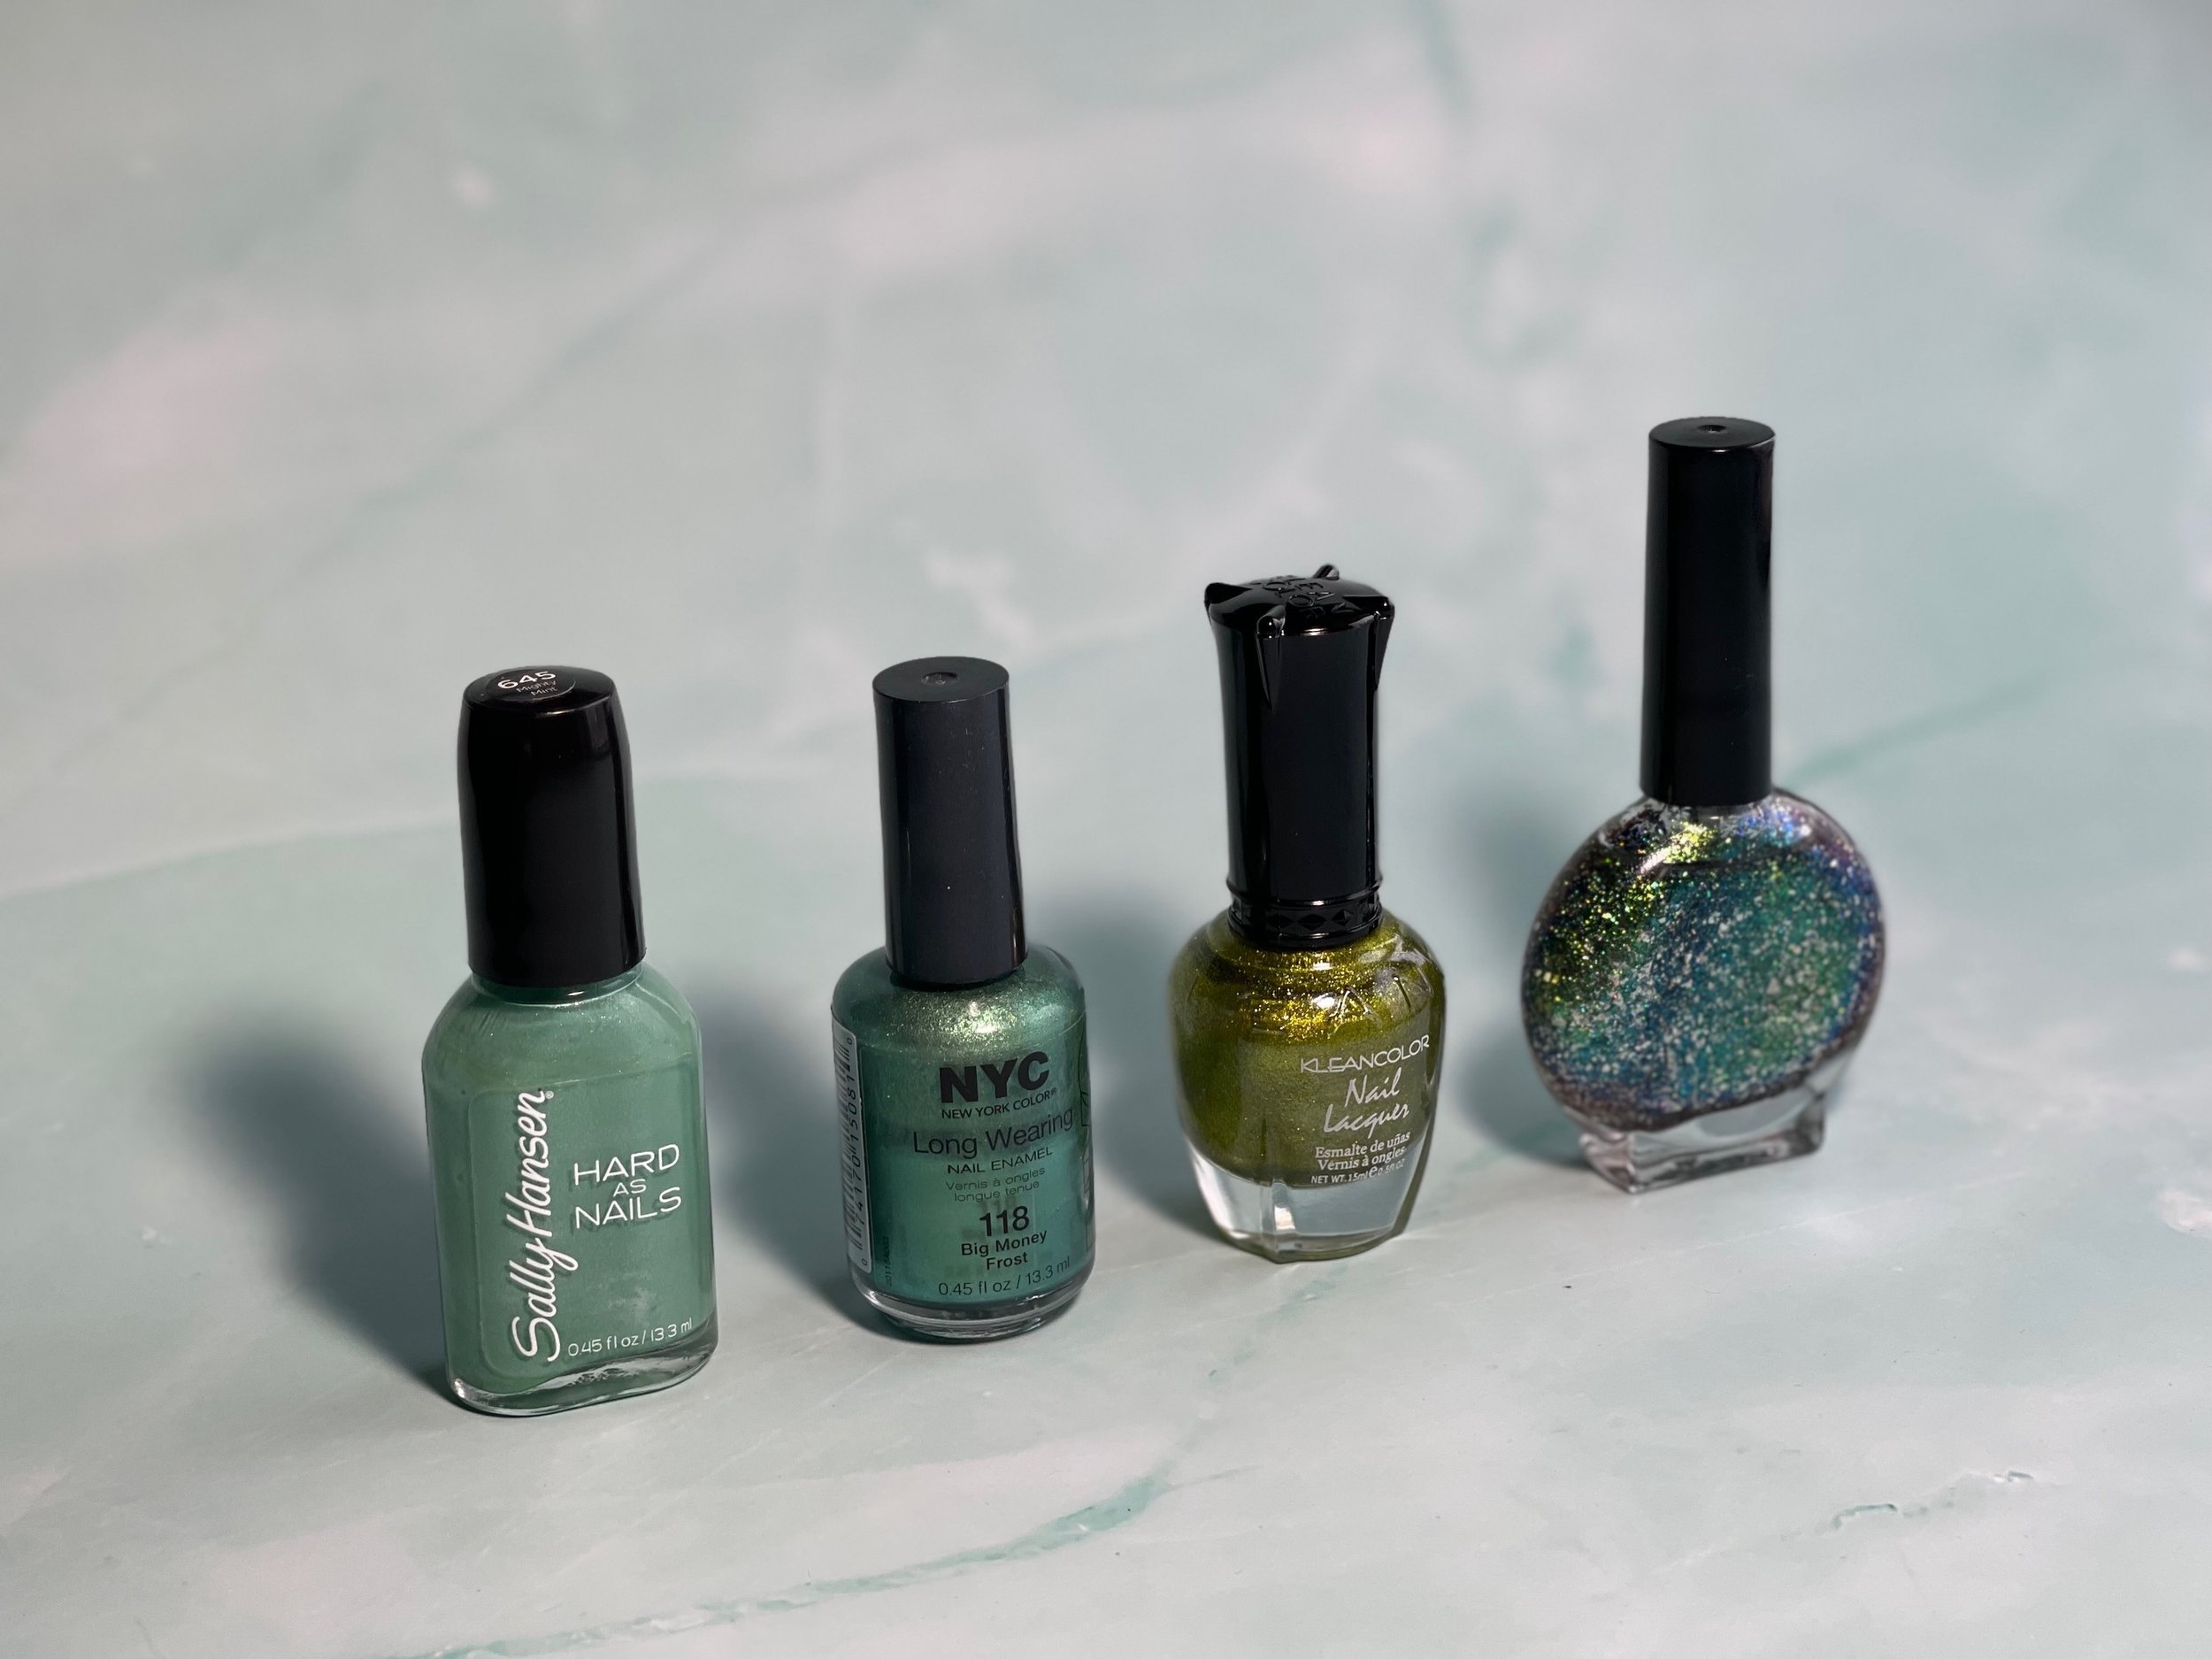 Green Glitter Nail Polish Swatches — Lots of Lacquer